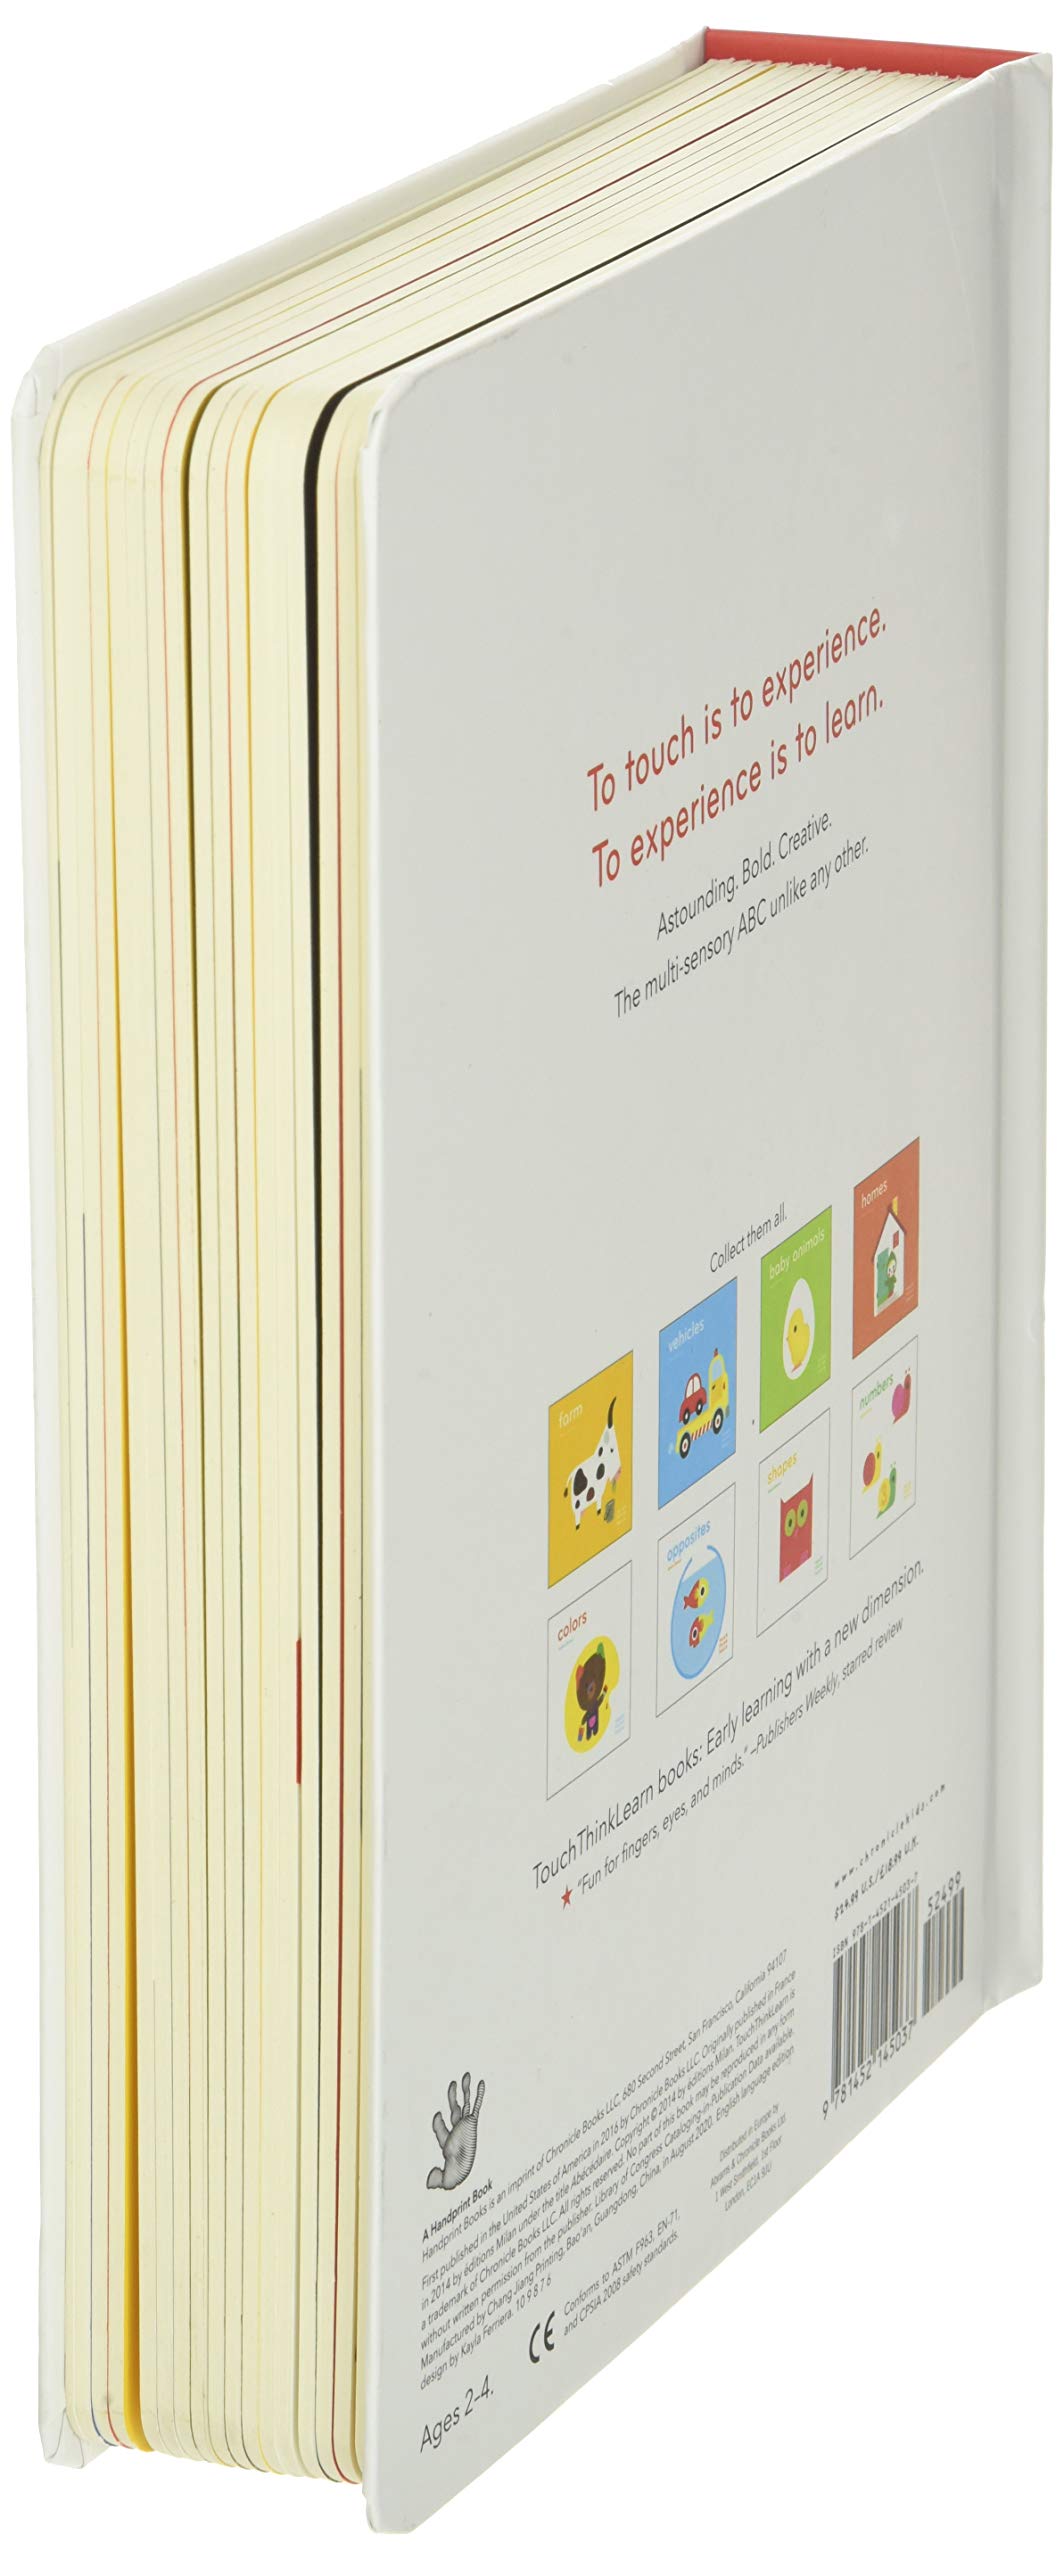 ABC Touch-Think-Learn Board Book